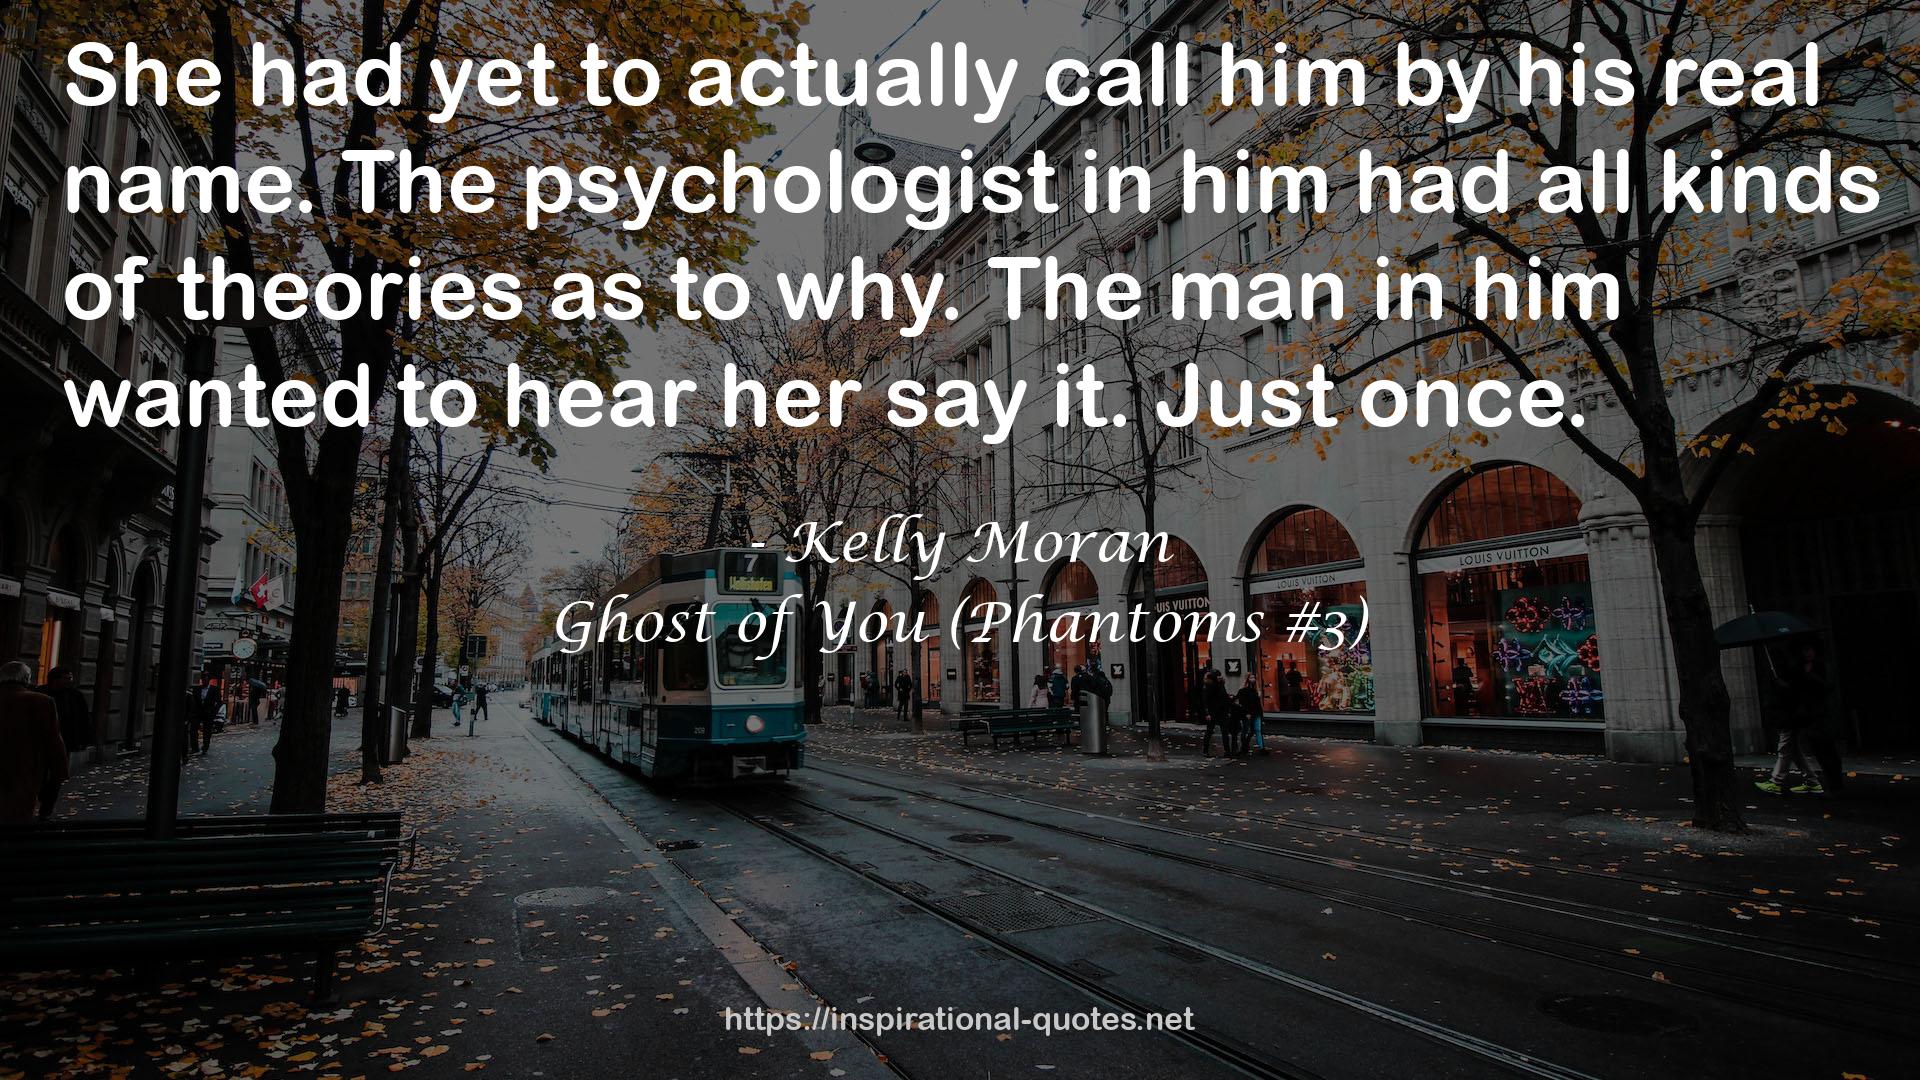 Ghost of You (Phantoms #3) QUOTES